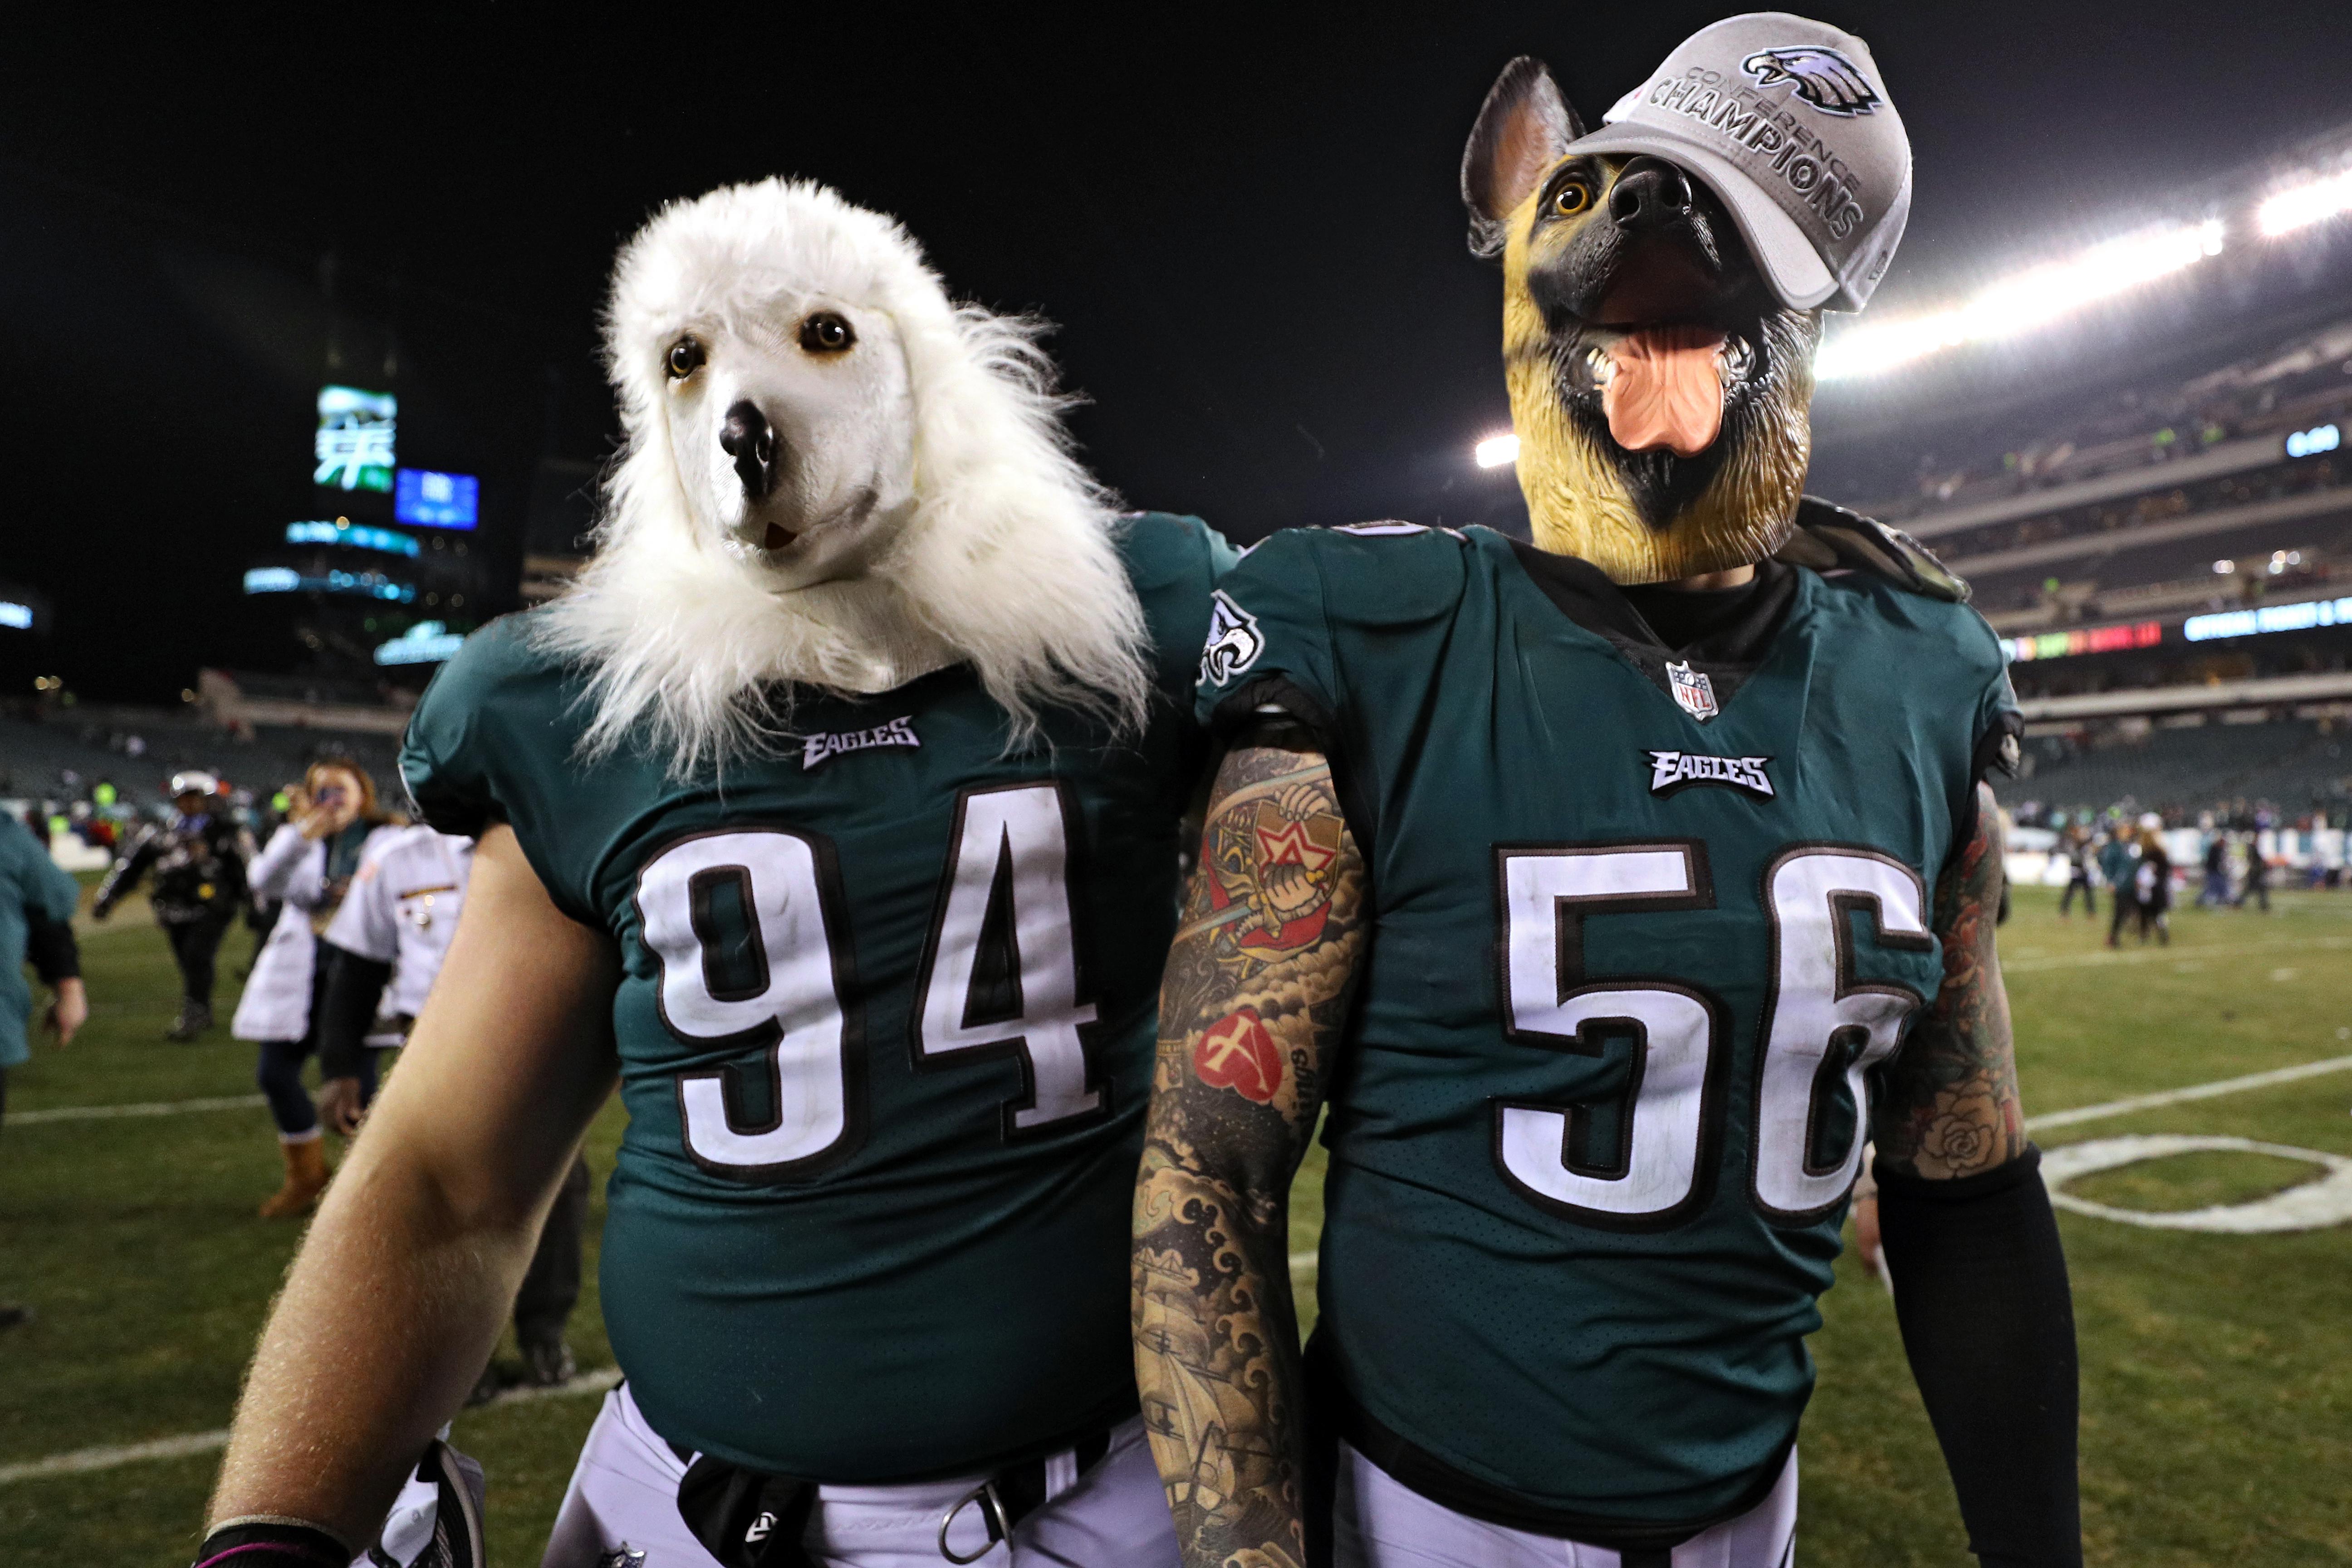 Dog-mask-wearing Beau Allen #94 and Chris Long #56 of the Philadelphia Eagles celebrate their team's win over the Minnesota Vikings.